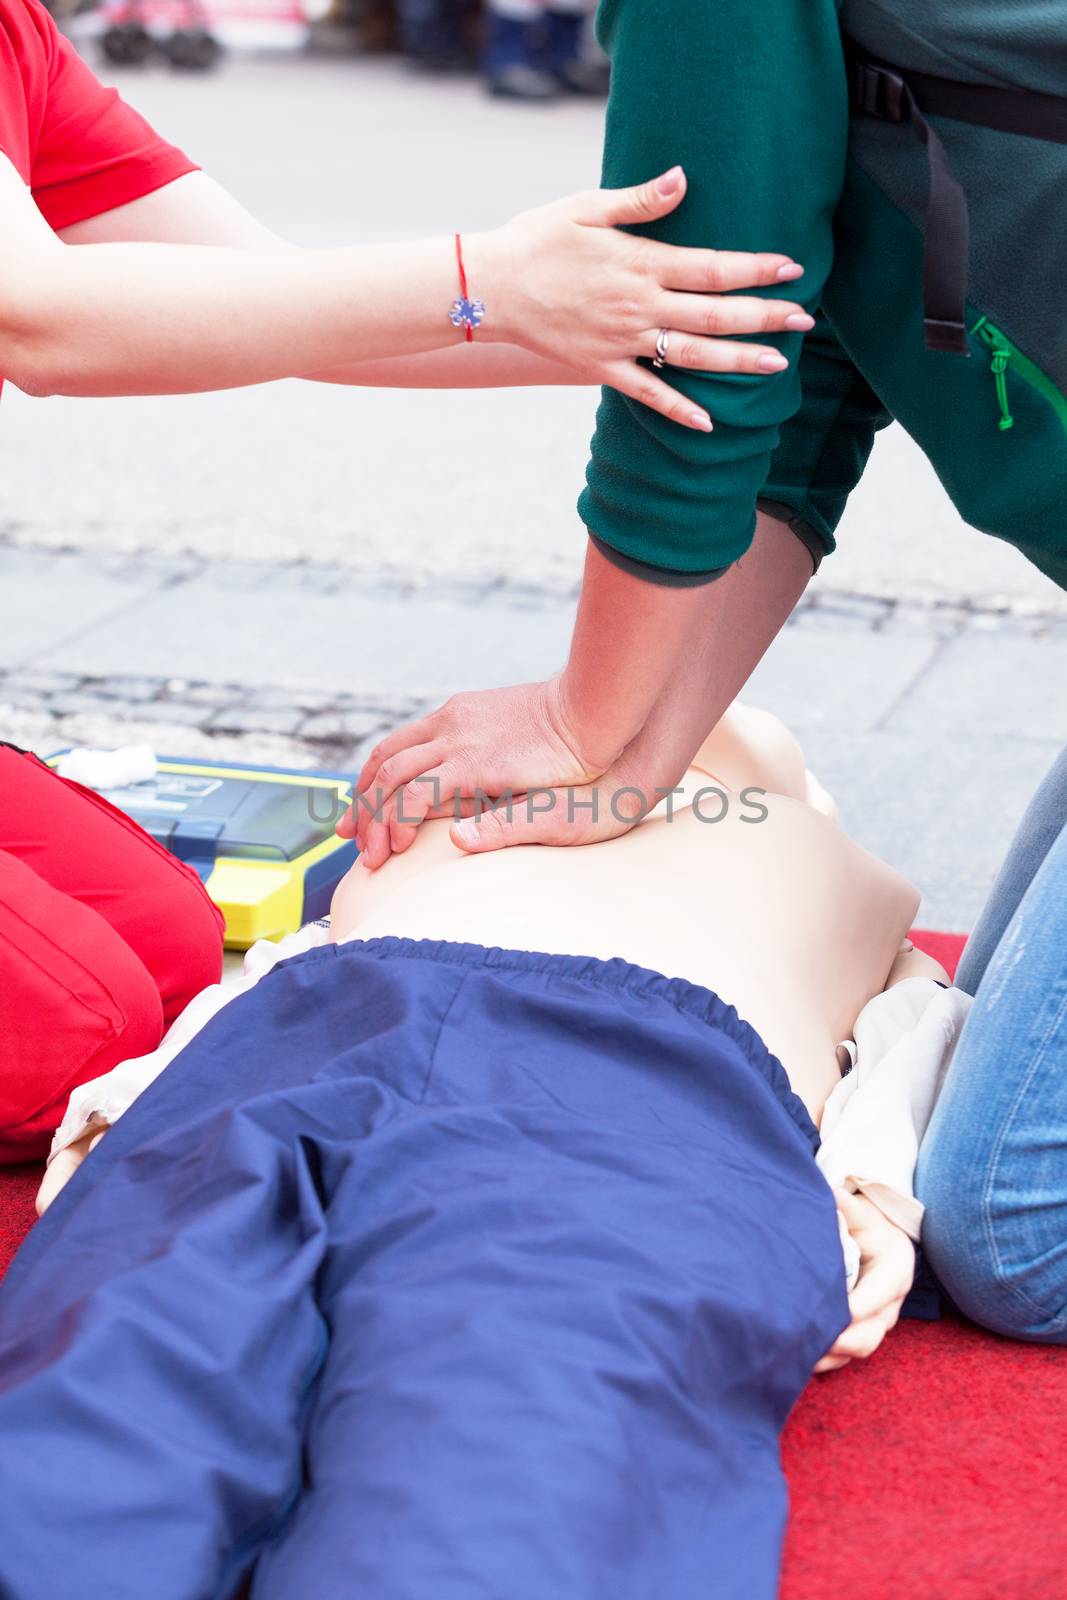 First aid training. CPR. by wellphoto